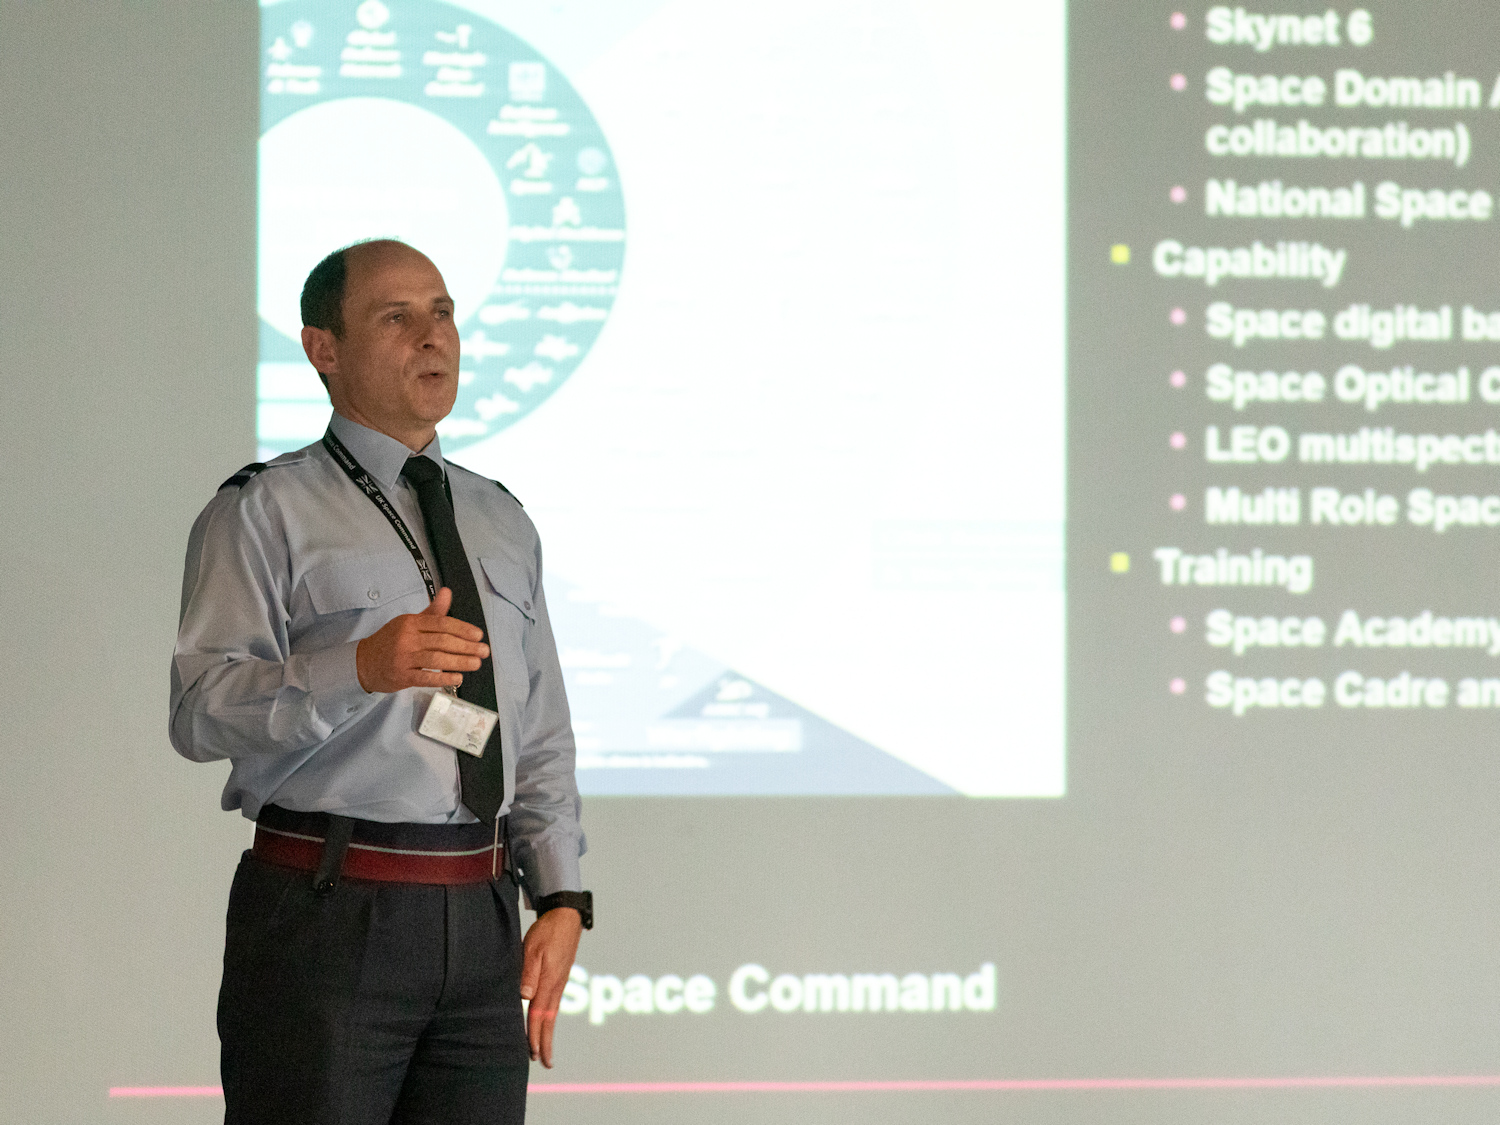 Air Commodore Flewin, Head of Space Operations, Plans and Training